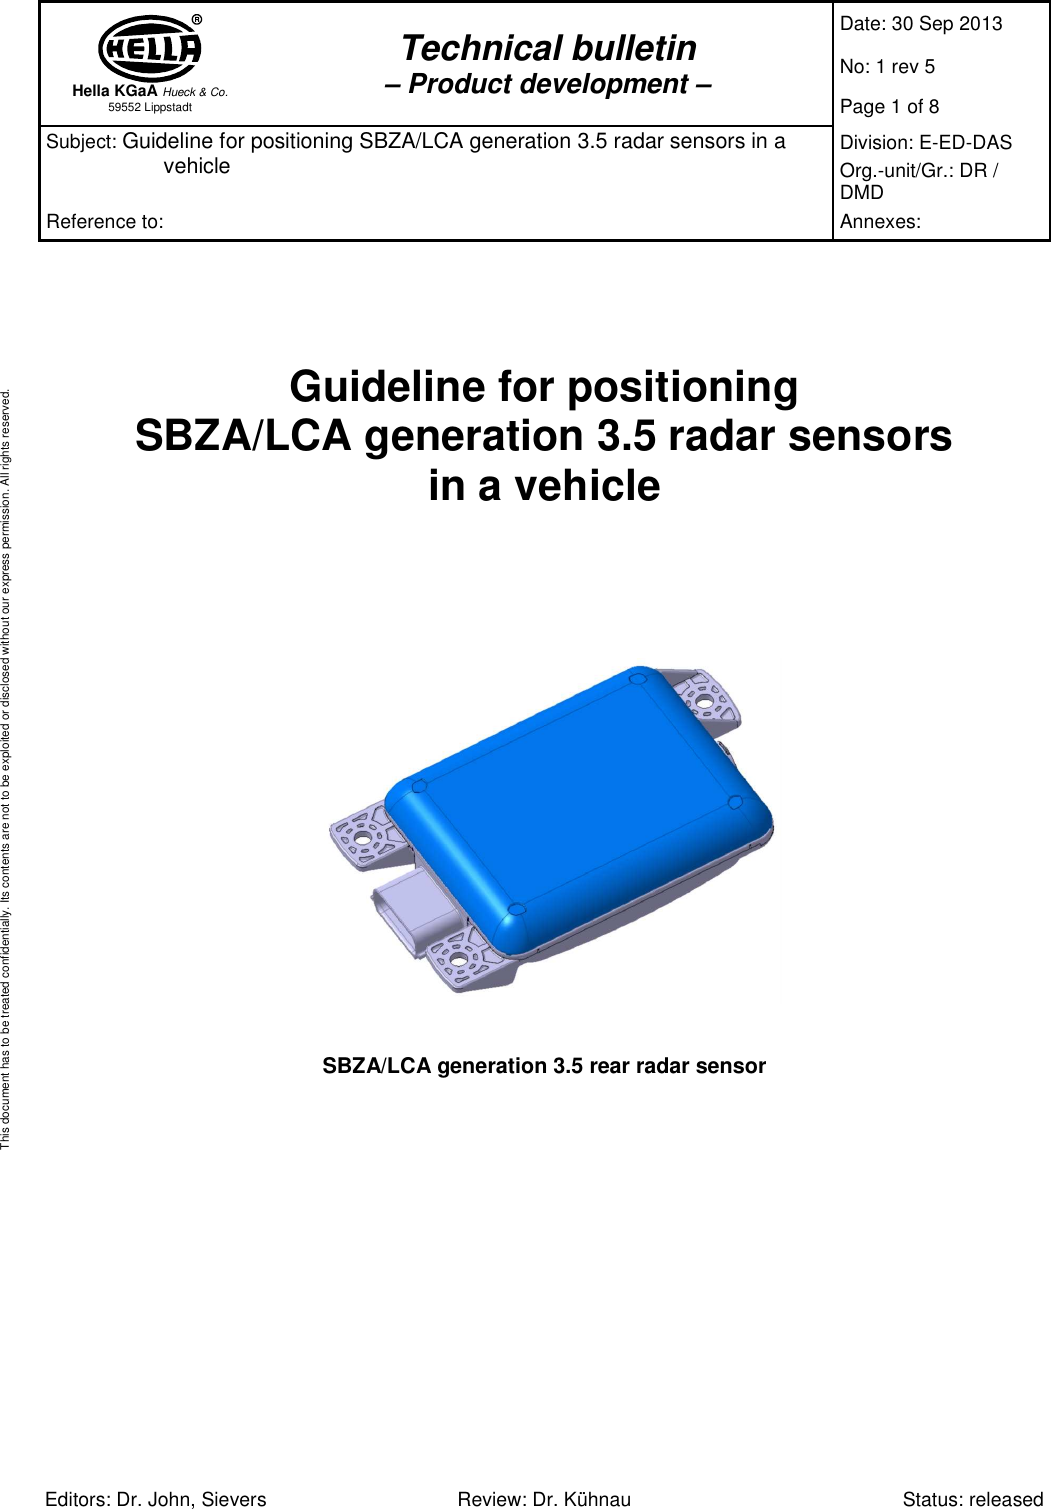  Hella KGaA Hueck &amp; Co. 59552 Lippstadt Technical bulletin – Product development – Date: 30 Sep 2013 No: 1 rev 5 Page 1 of 8 Subject: Guideline for positioning SBZA/LCA generation 3.5 radar sensors in a vehicle  Division: E-ED-DAS Org.-unit/Gr.: DR / DMD Reference to:  Annexes:   Editors: Dr. John, Sievers  Review: Dr. Kühnau  Status: released This document has to be treated confidentially. Its contents are not to be exploited or disclosed without our express permission. All rights reserved.    Guideline for positioning SBZA/LCA generation 3.5 radar sensors in a vehicle         SBZA/LCA generation 3.5 rear radar sensor  